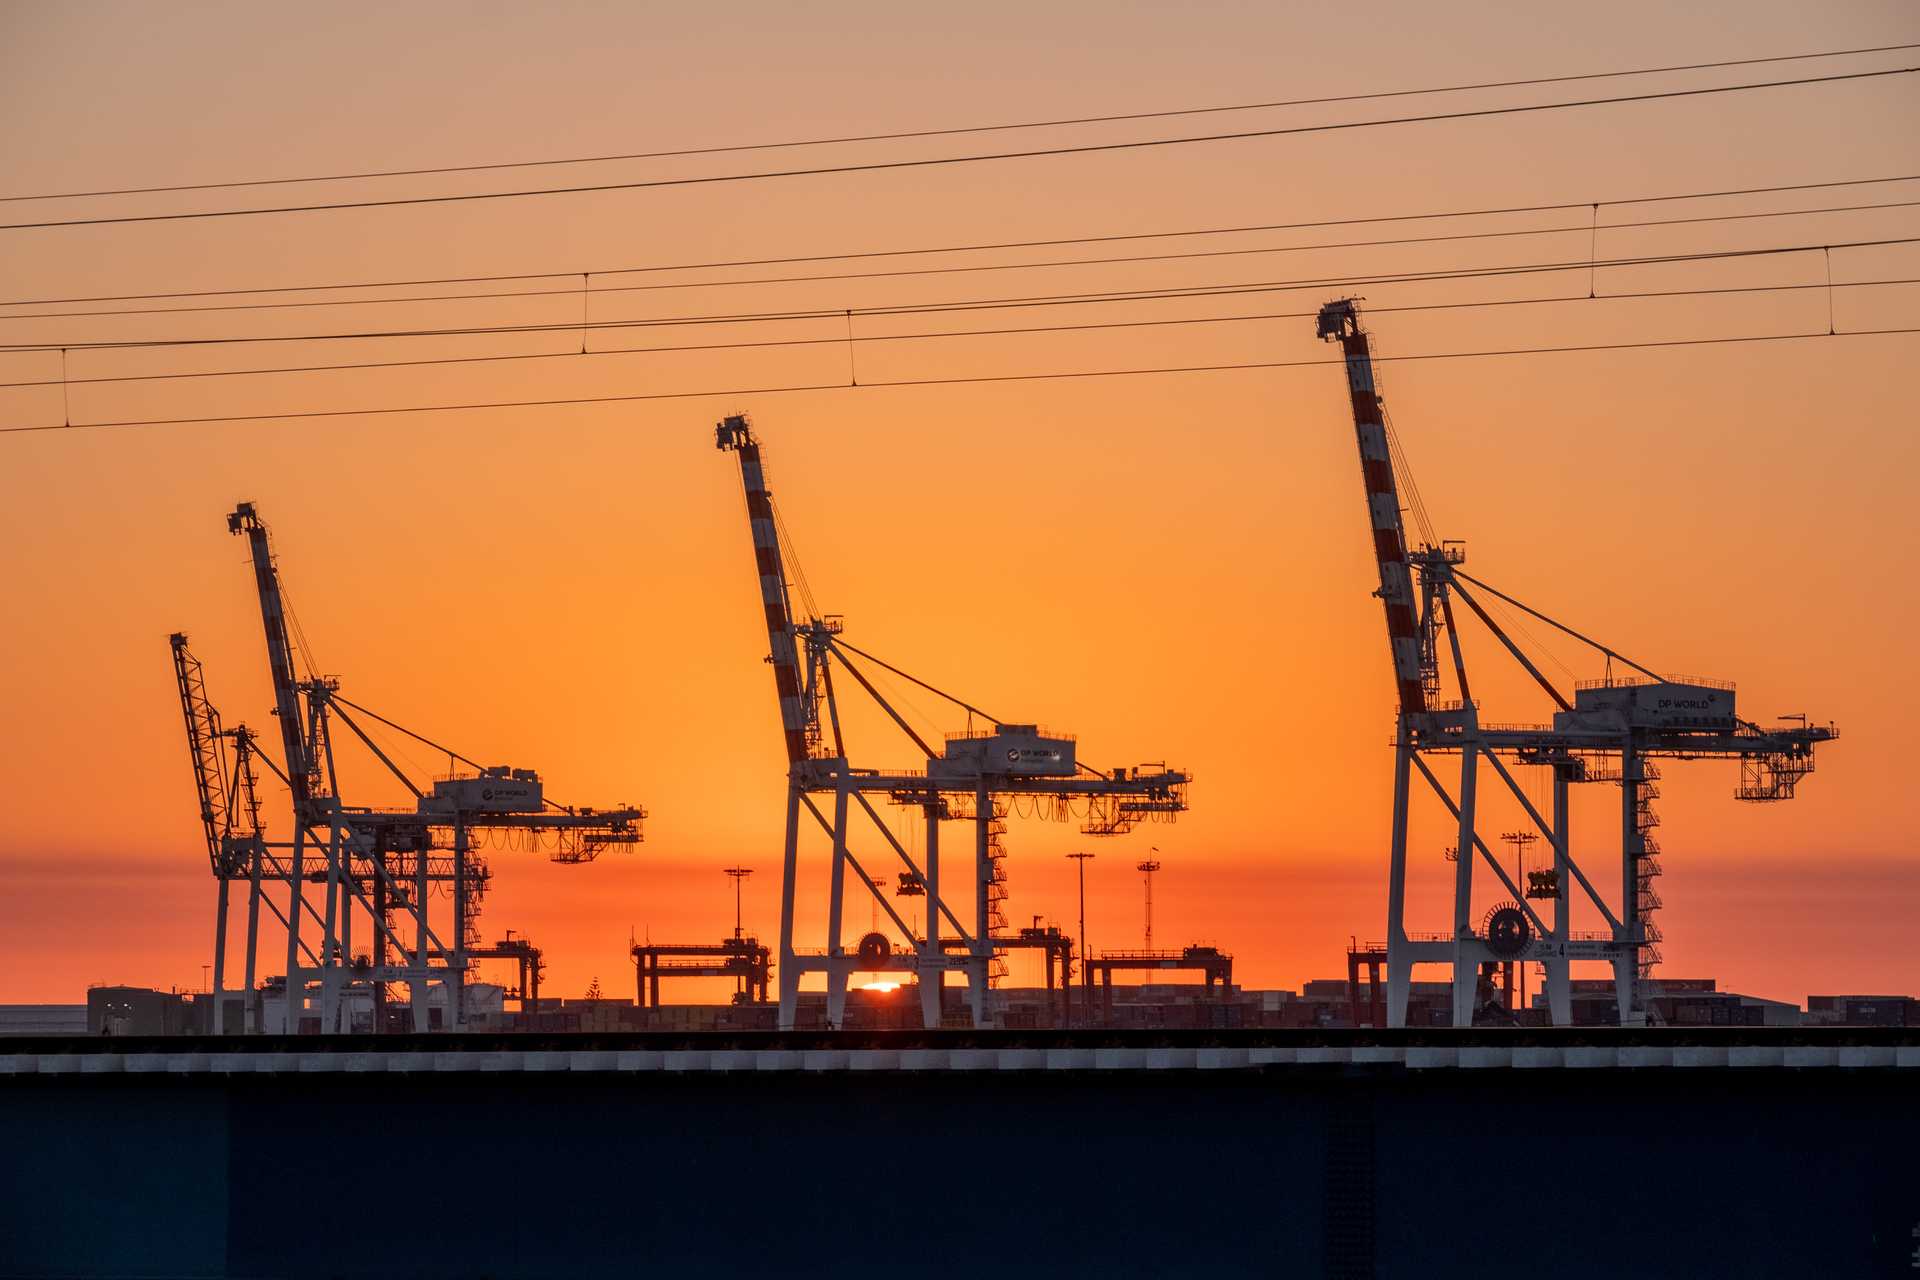 Fremantle Port at sunset | FUJIFILM X-T2 | XF50-140mmF2.8 R LM OIS WR | 106.0 mm | 1/250 | f/8 | ISO 400